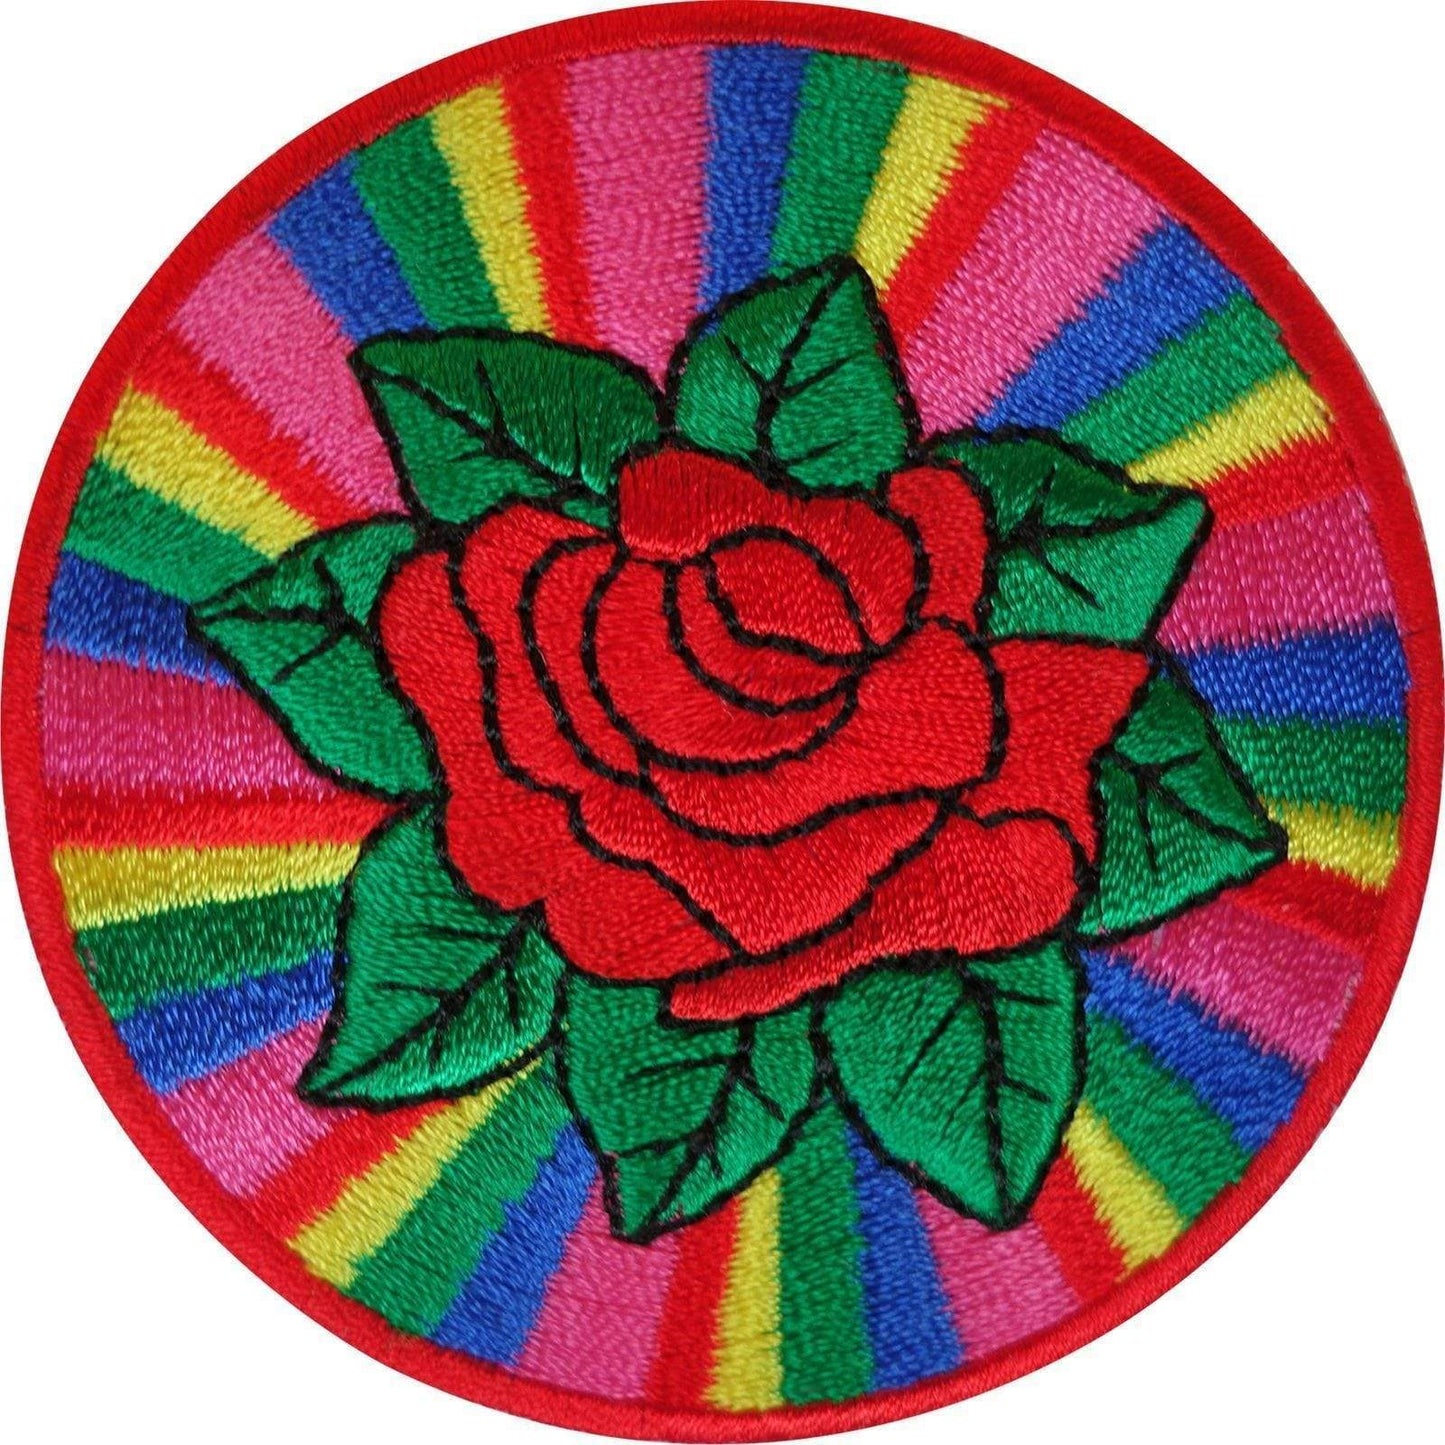 Embroidered Iron On Rainbow Rose Patch Sew On Badge Clothing Embroidery Applique